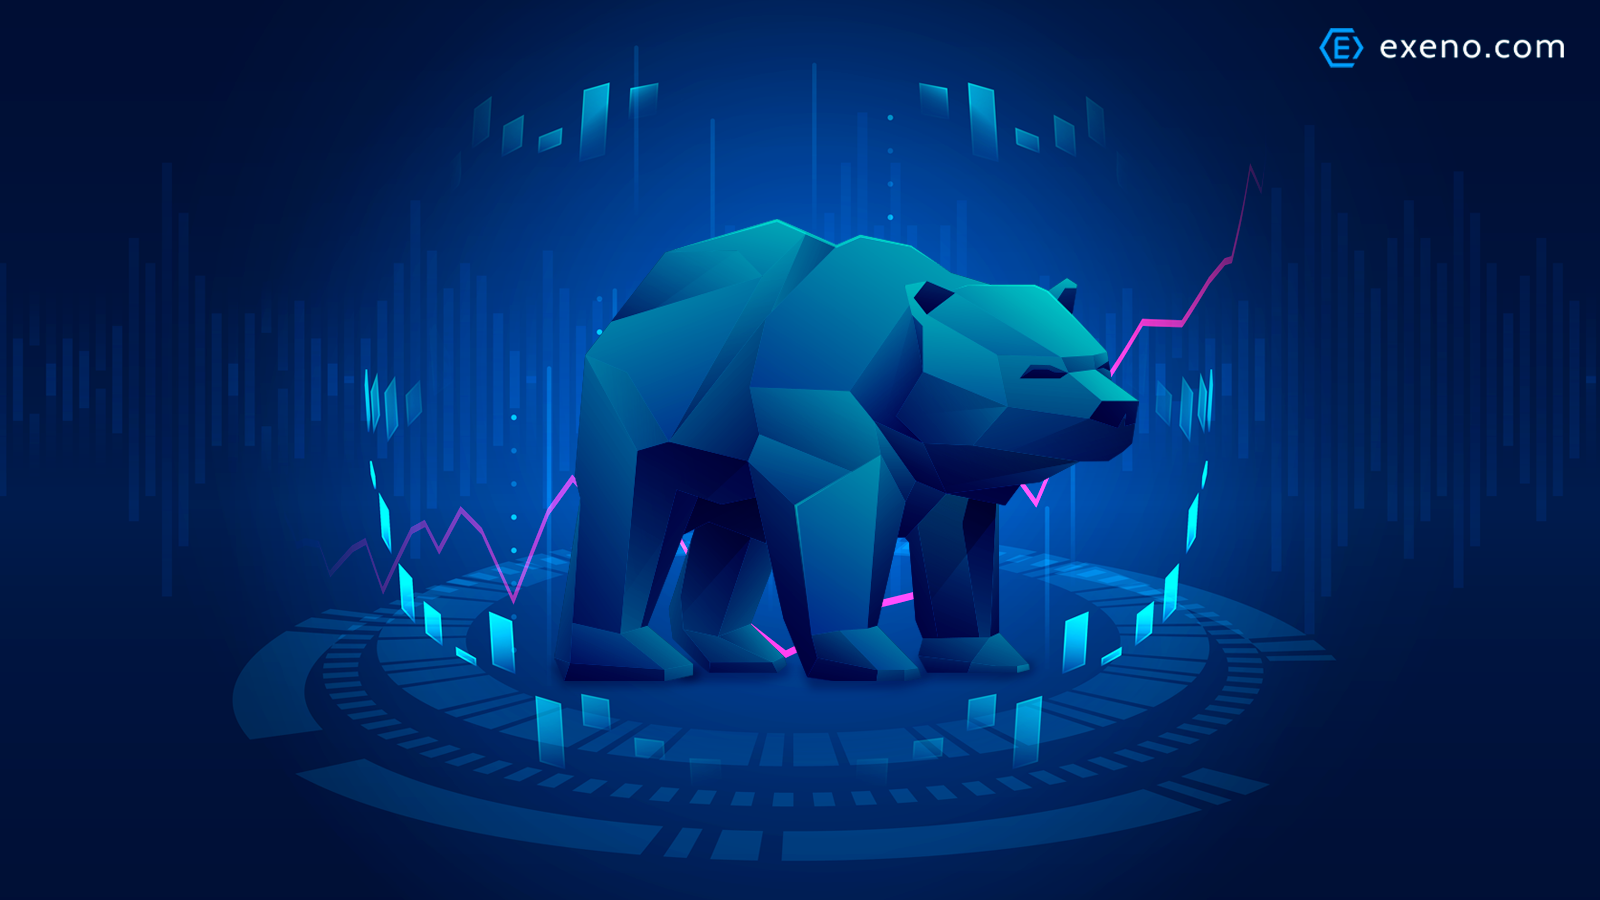 We Shall Overcome: Showing Resilience in a Bear Market